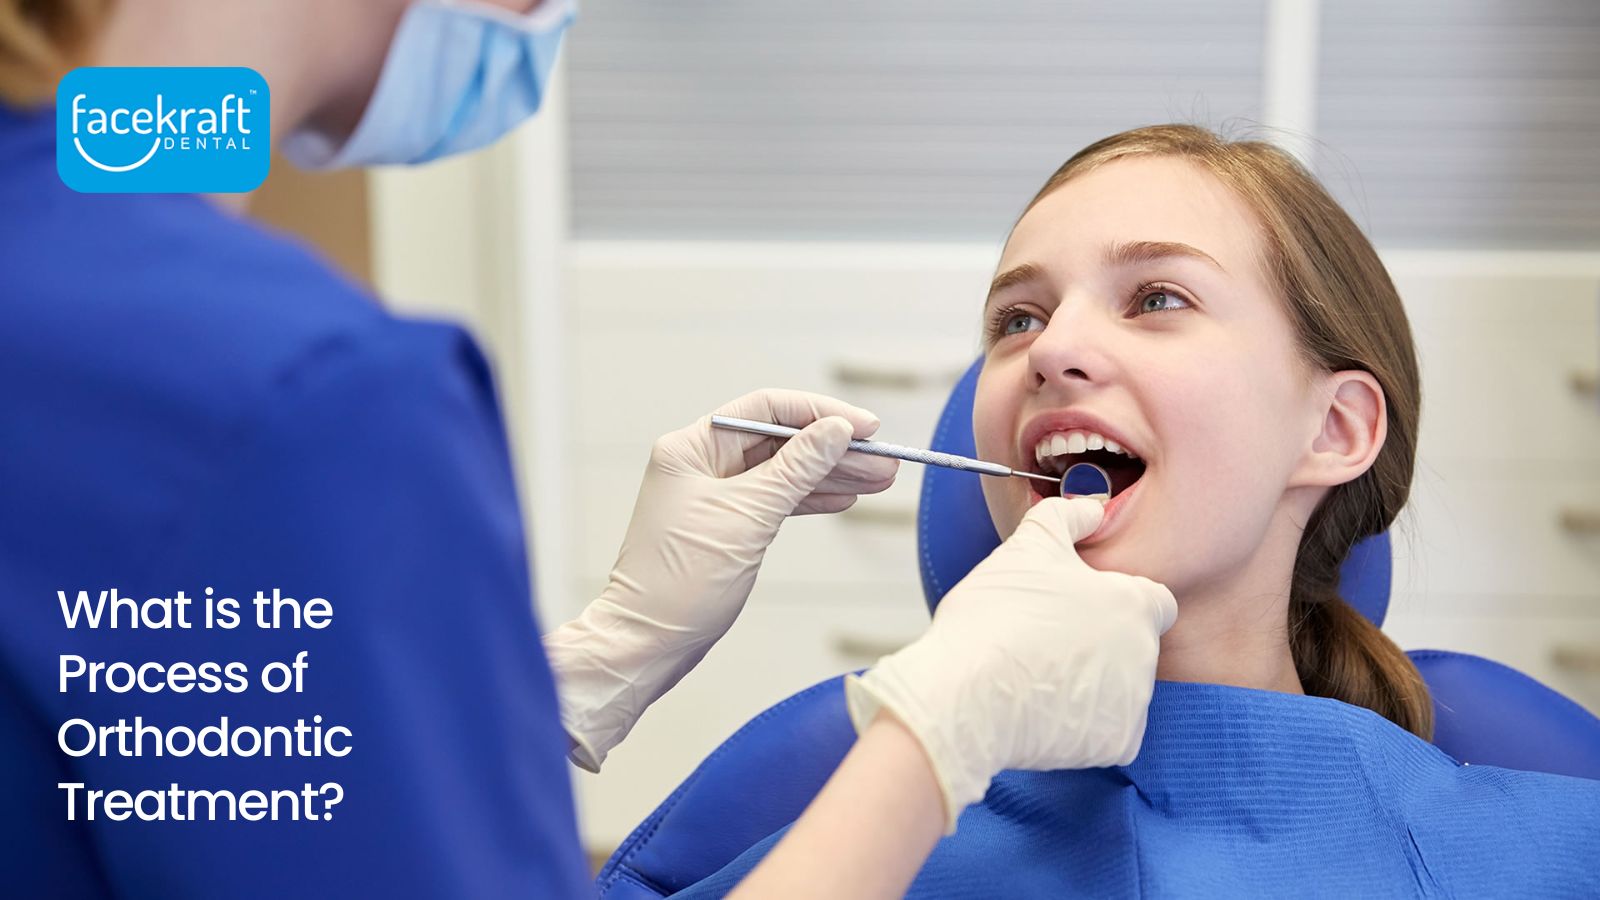 What is the Process of Orthodontic Treatment?